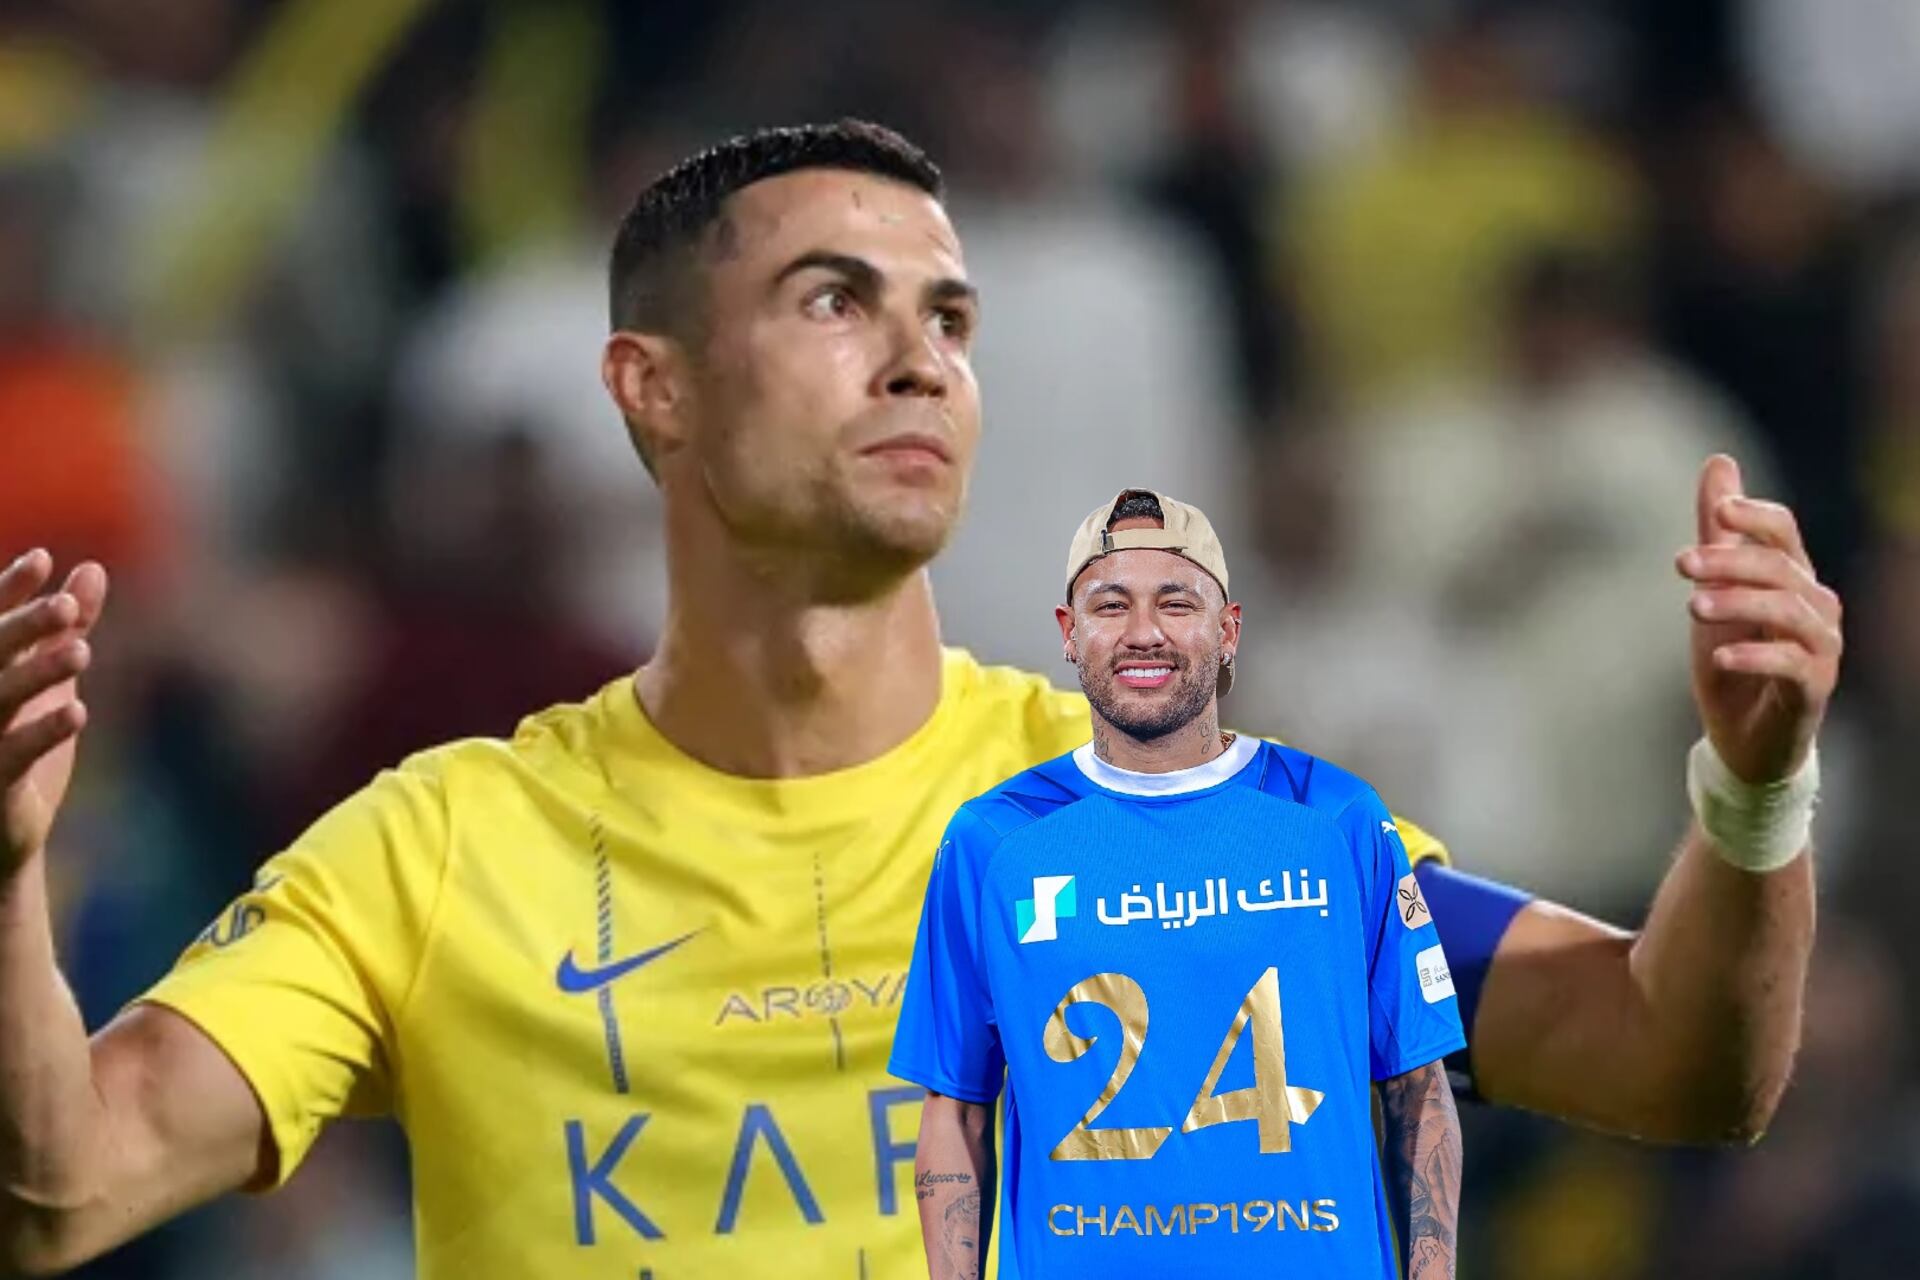 Cristiano won't like it, Neymar's Al Hilal is champion in Saudi and the humiliating gesture CR7 may do